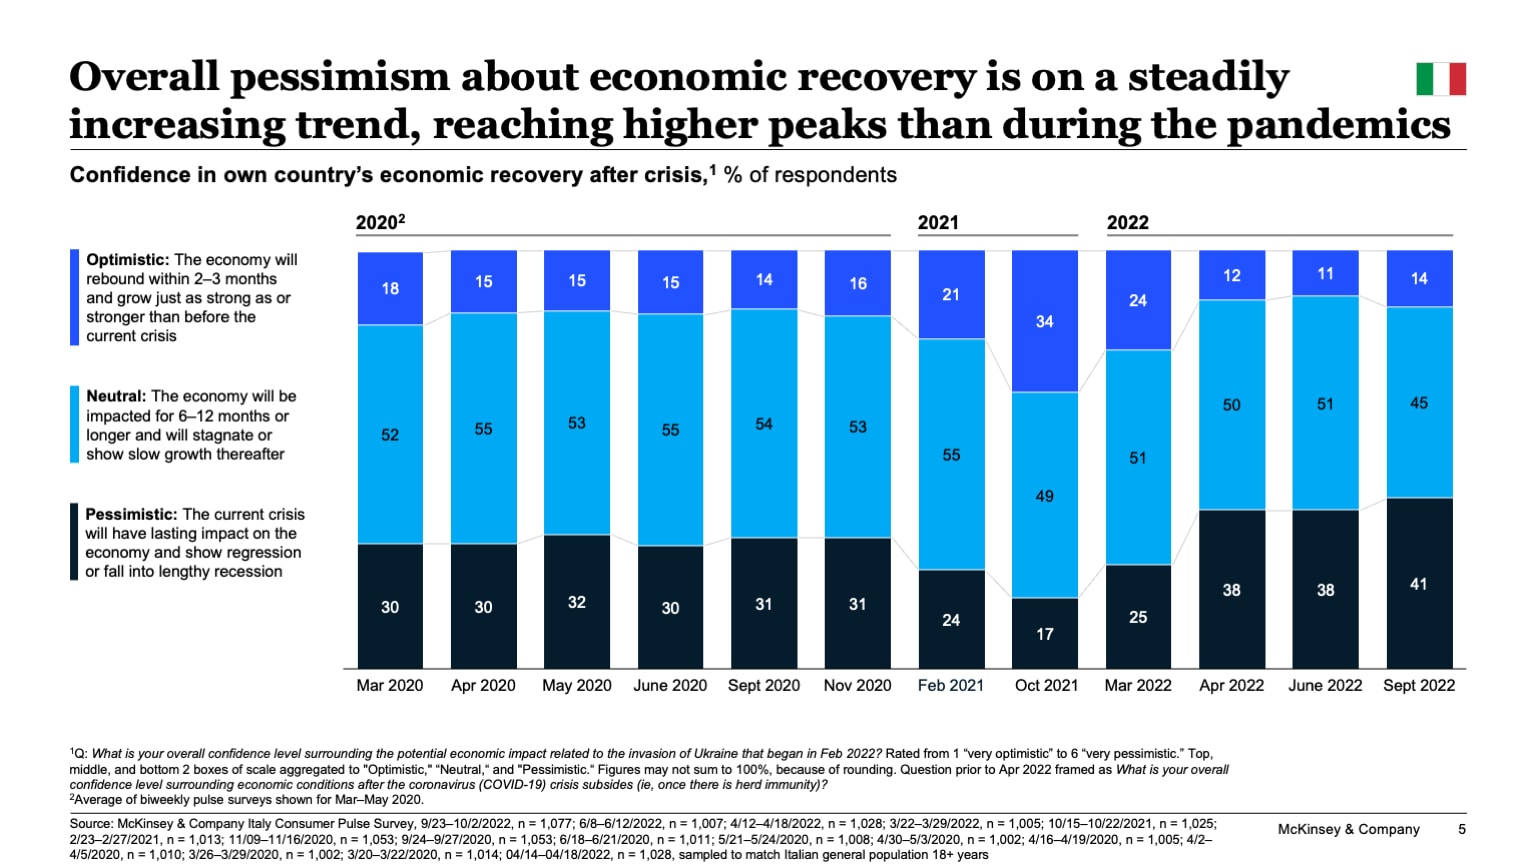 Overall pessimism about economic recovery is on a steadily increasing trend, reaching higher peaks than during the pandemics